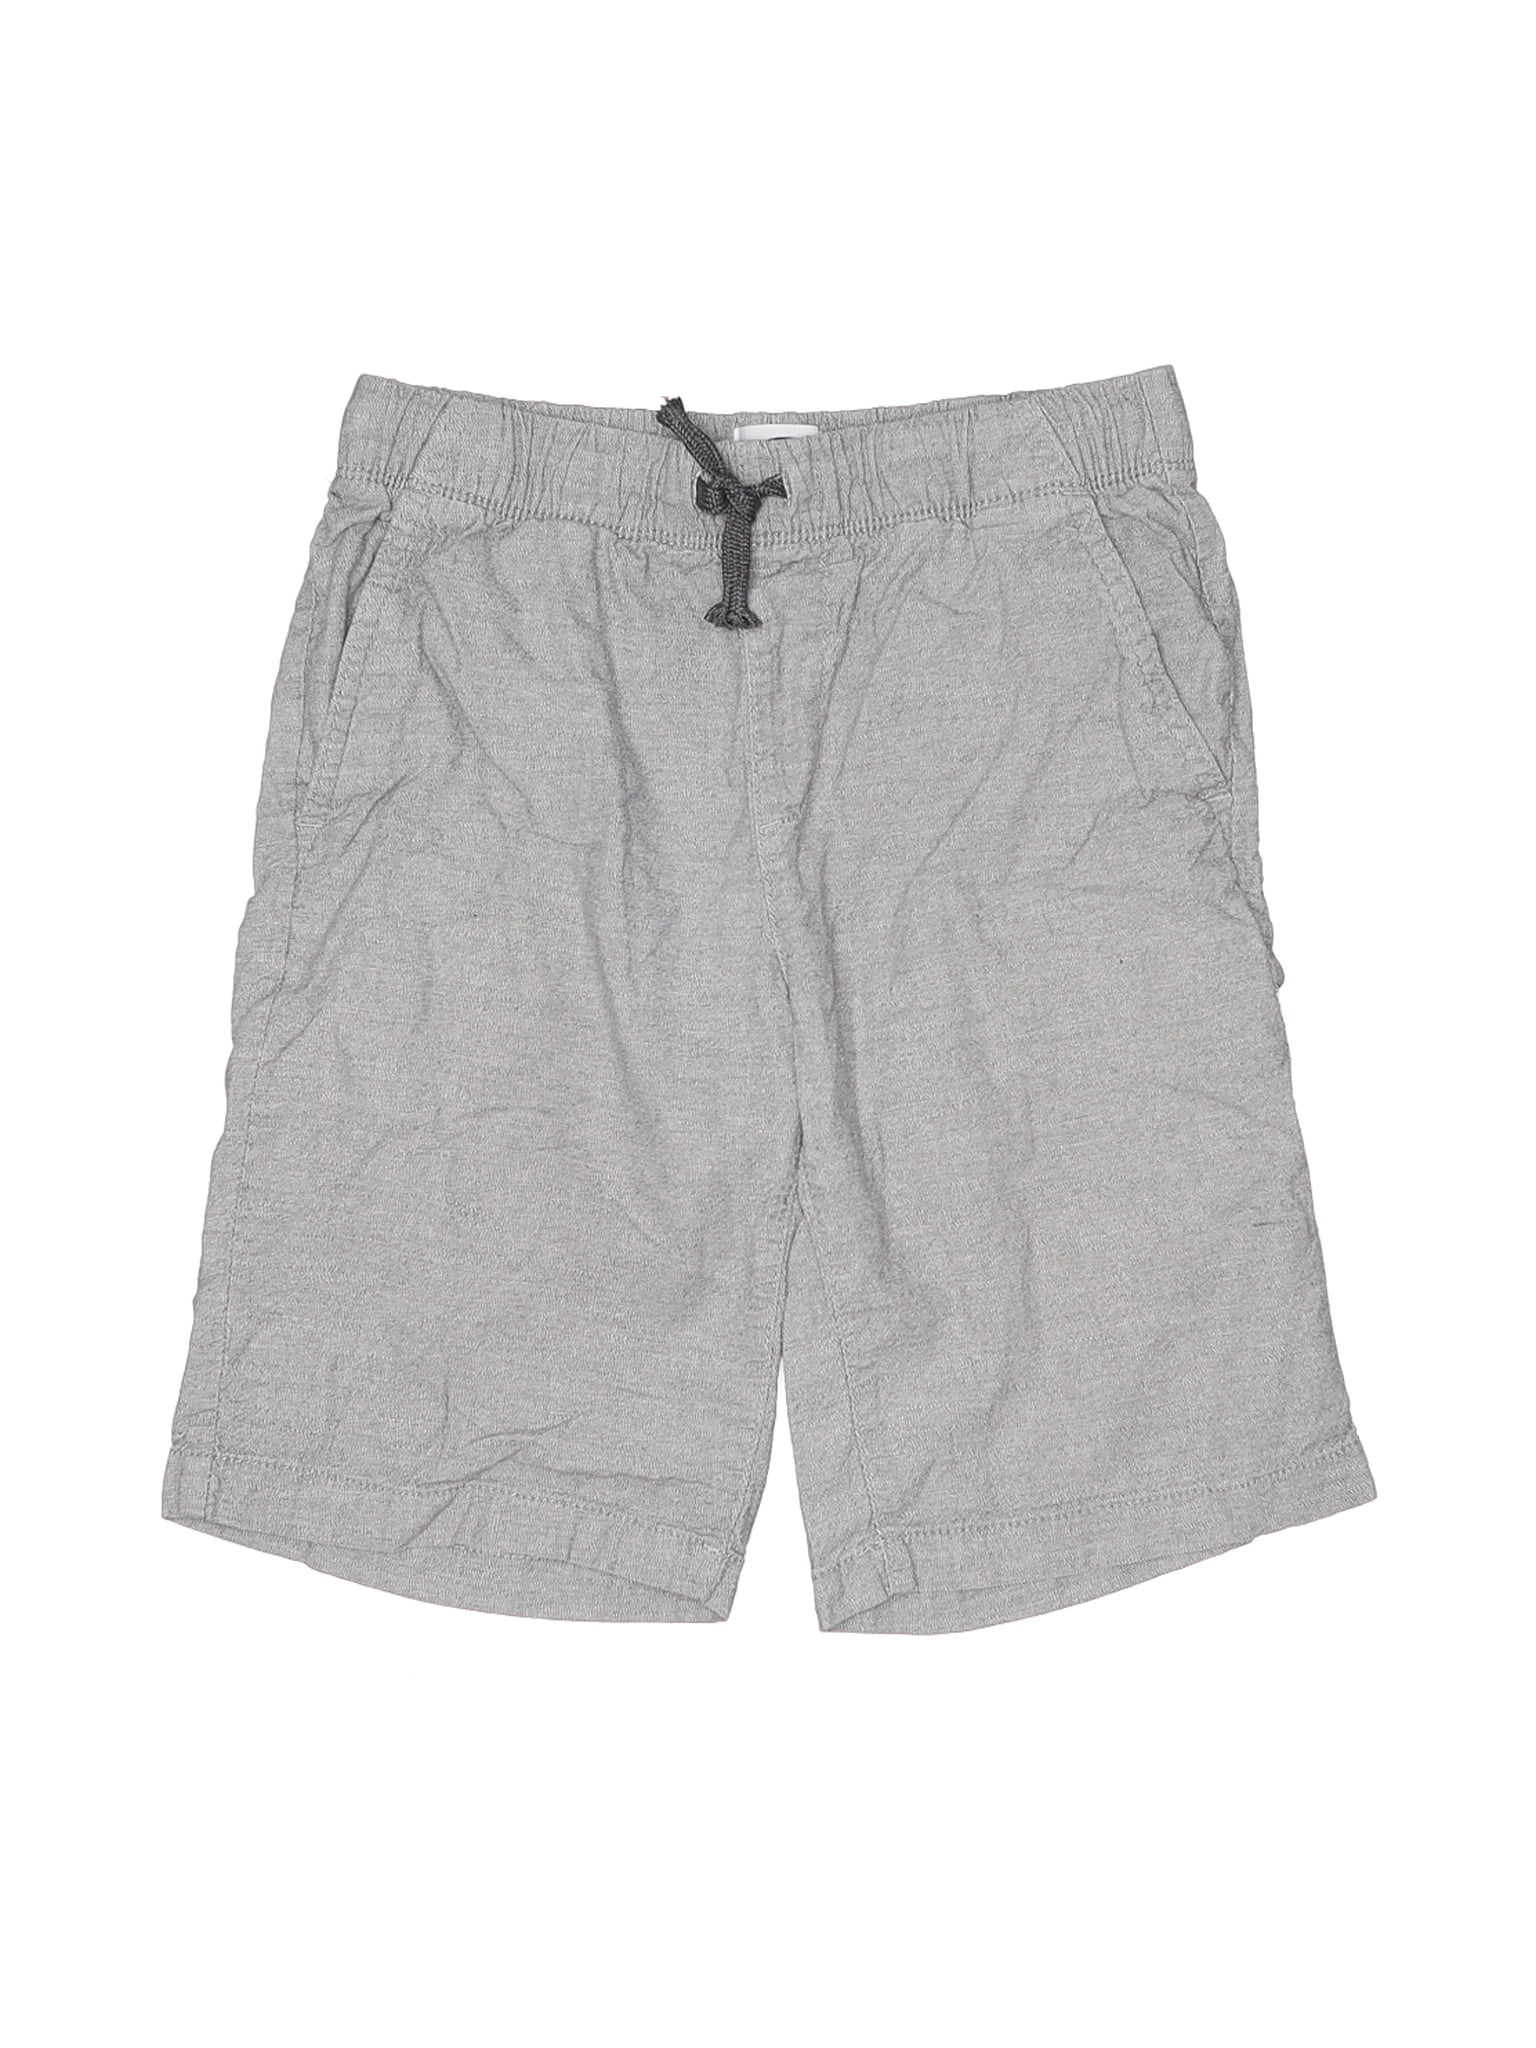 Old Navy - Pre-Owned Old Navy Boy's Size 10 Shorts - Walmart.com ...